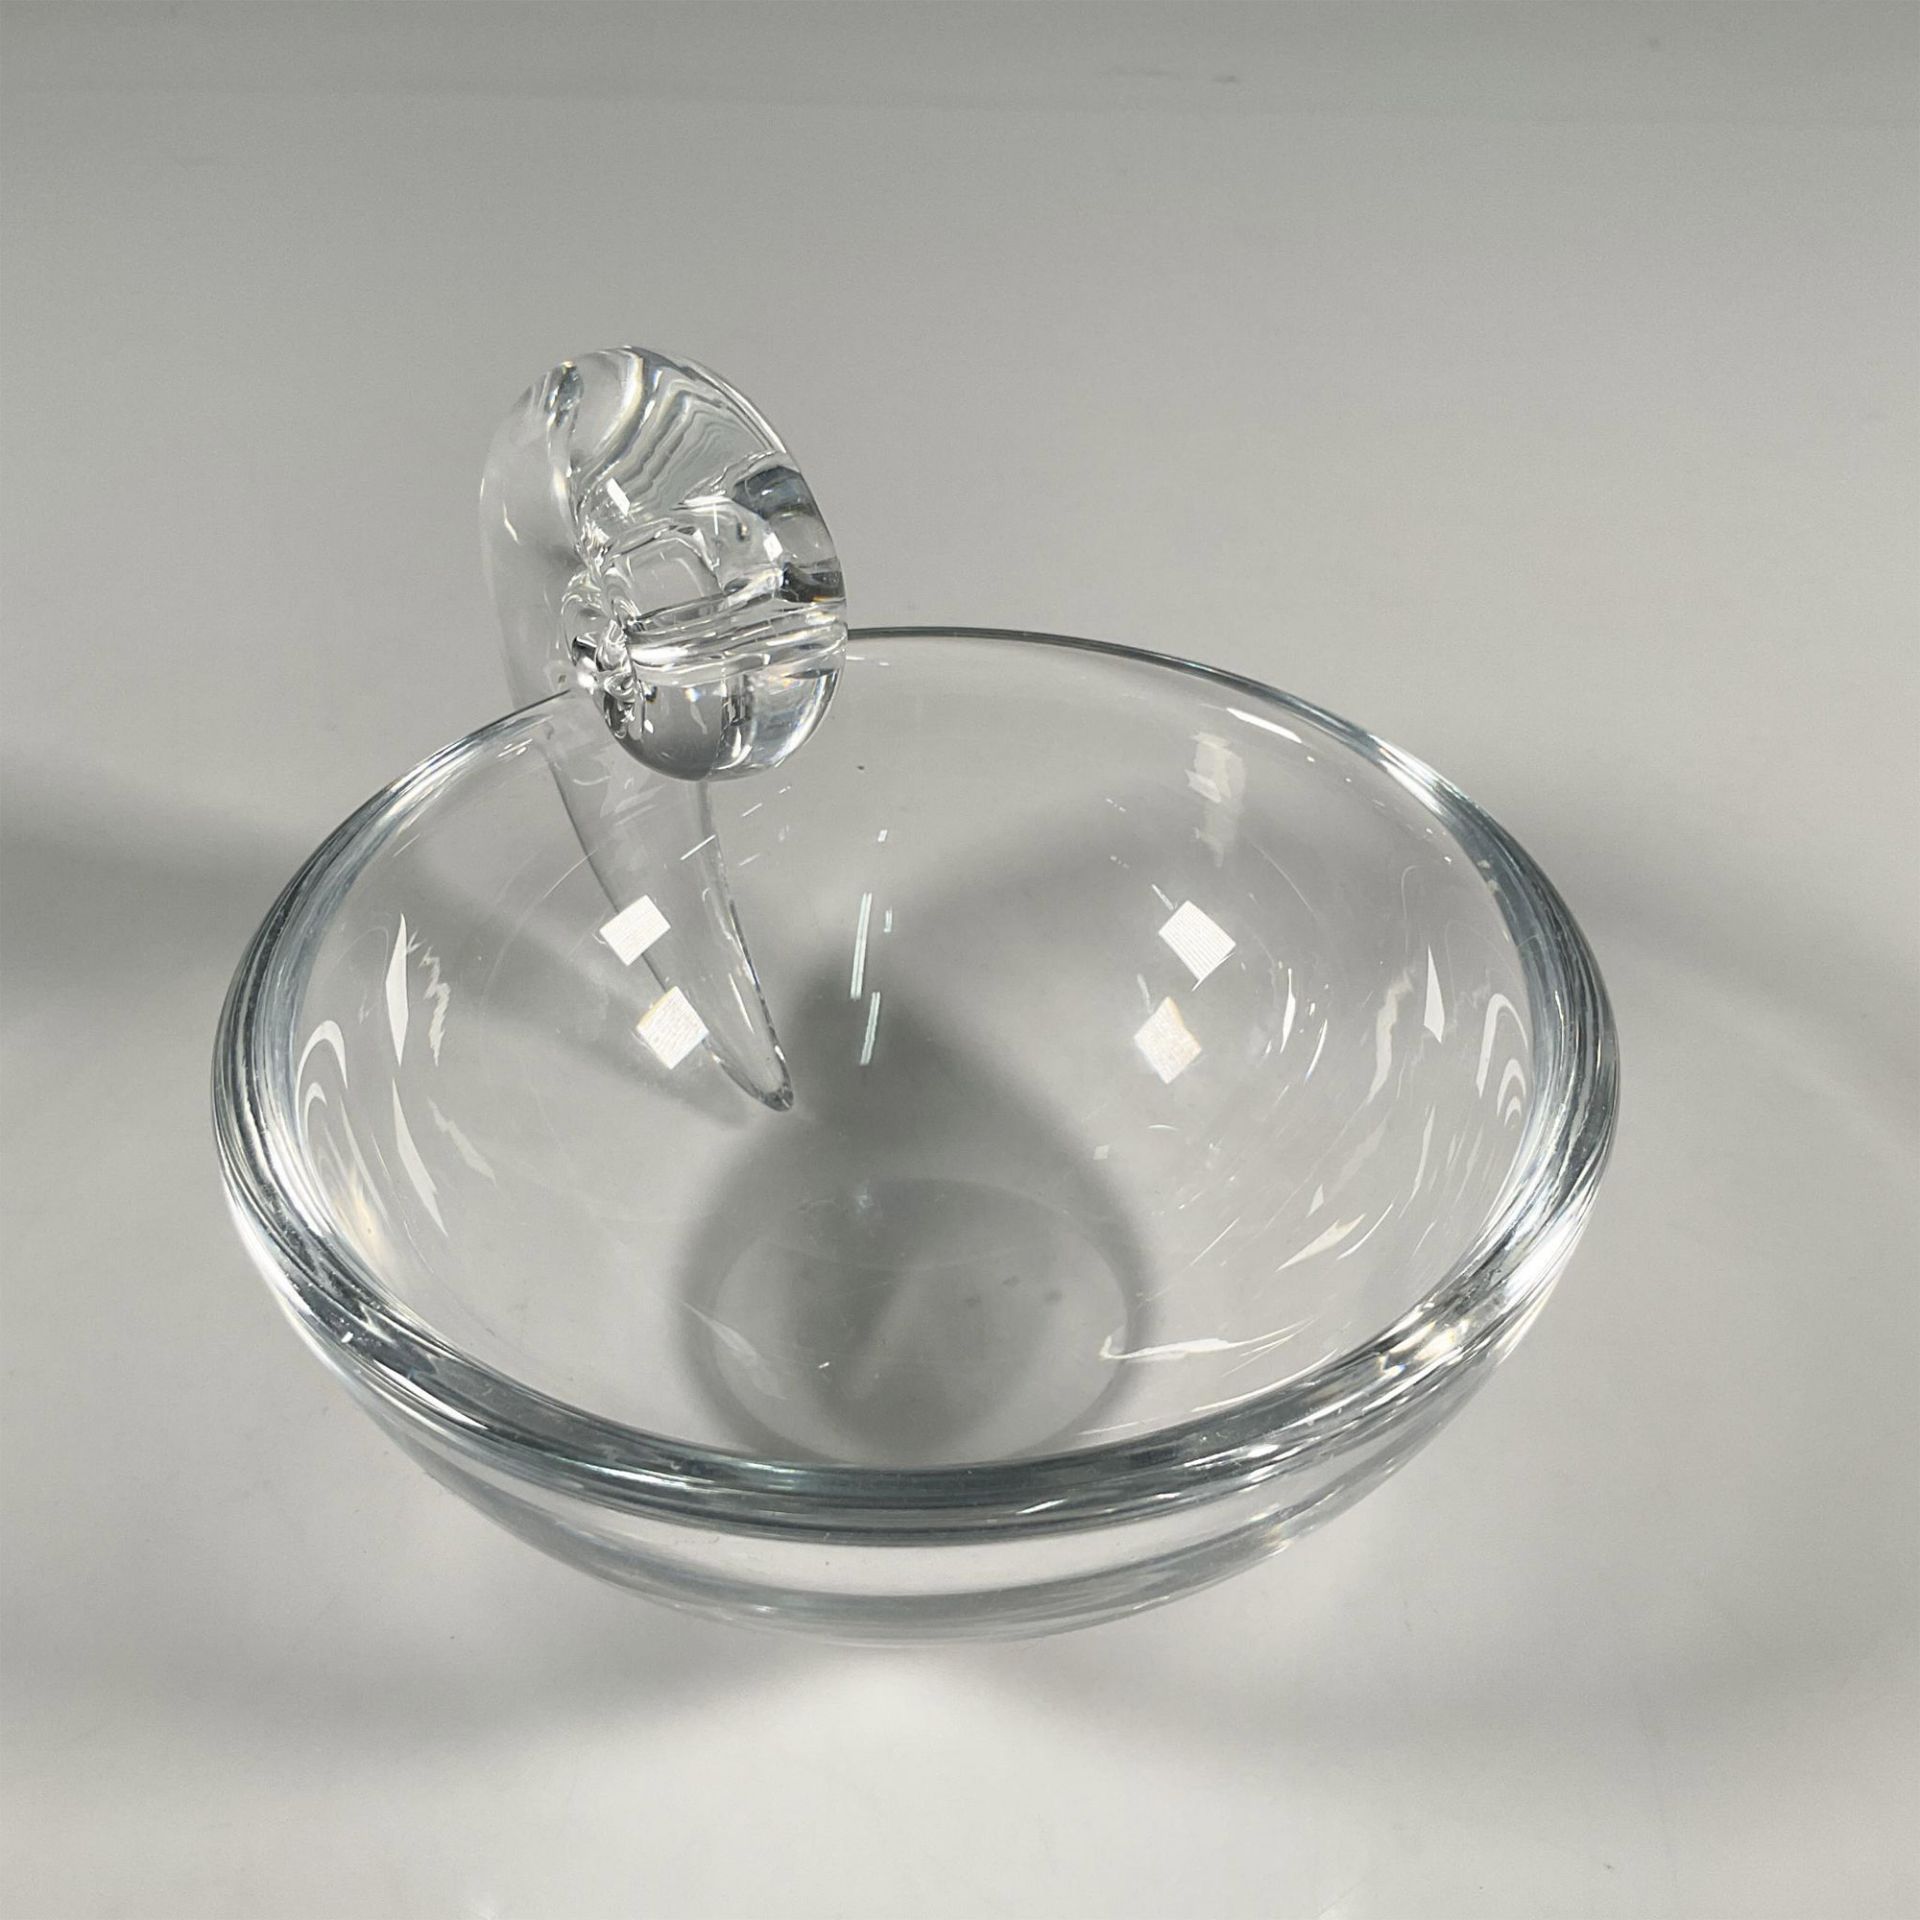 Steuben Art Glass Bowl with Snail Handle by John Dreves - Image 2 of 4